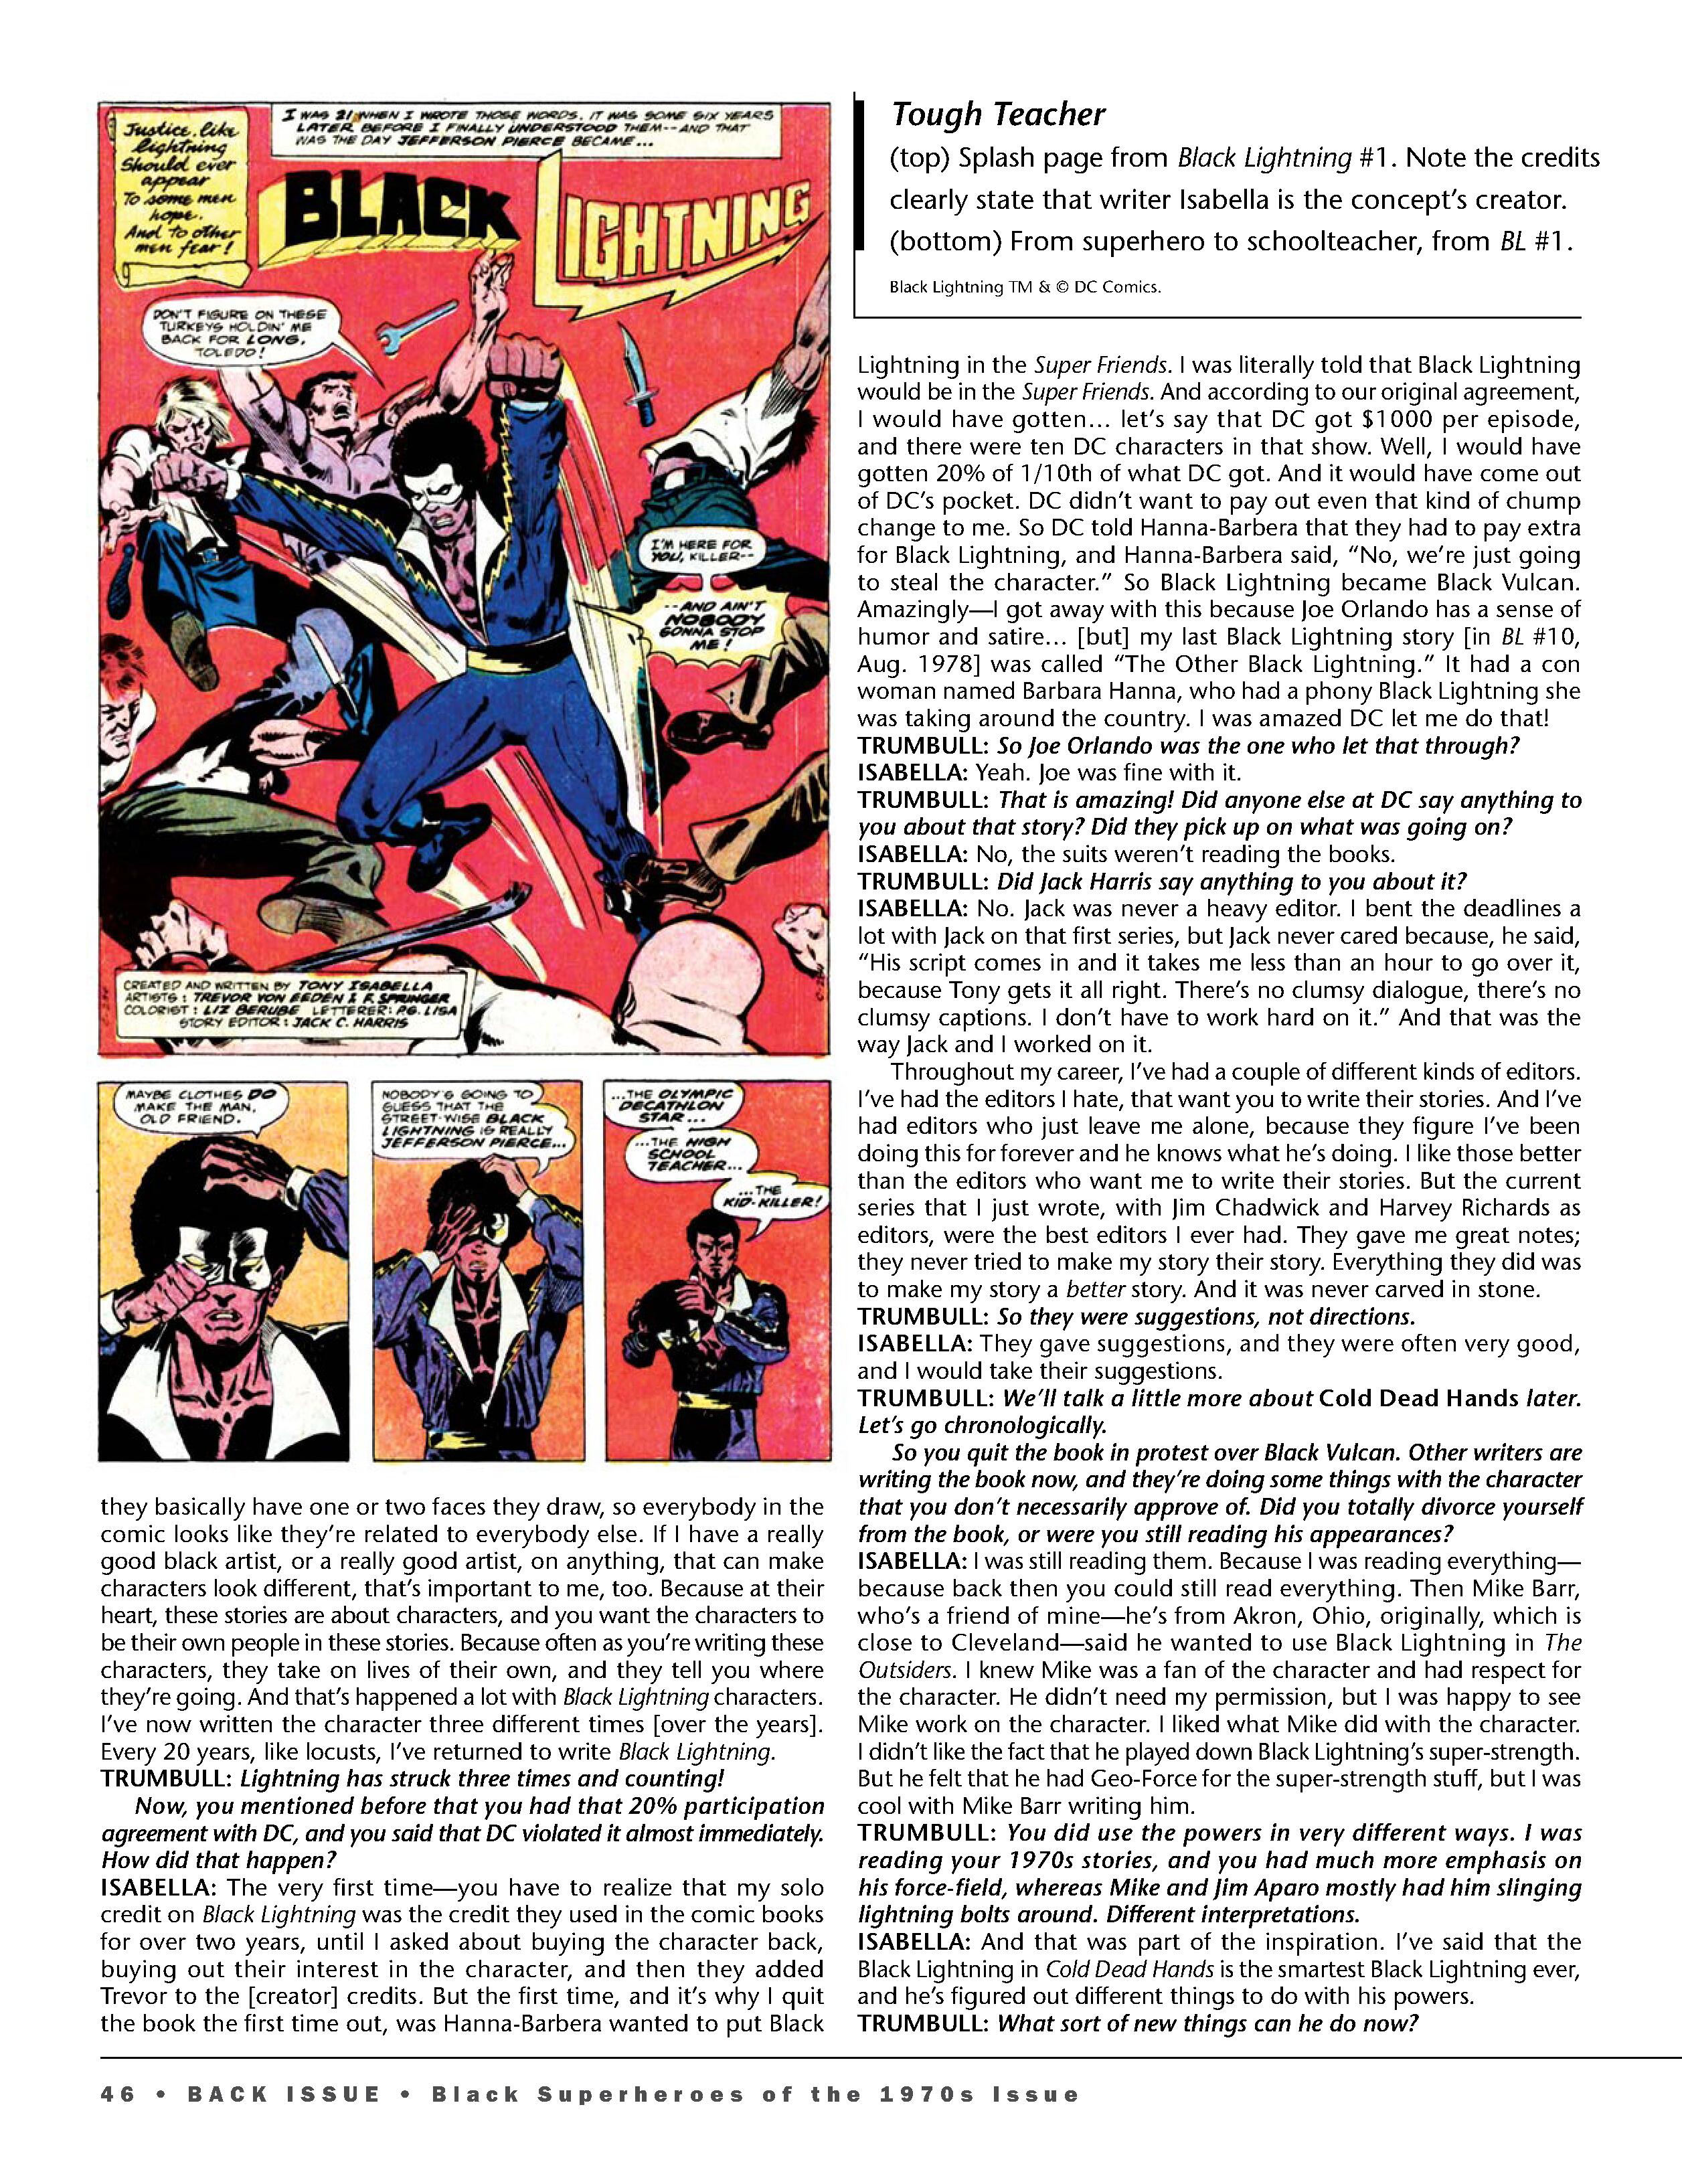 Read online Back Issue comic -  Issue #114 - 48